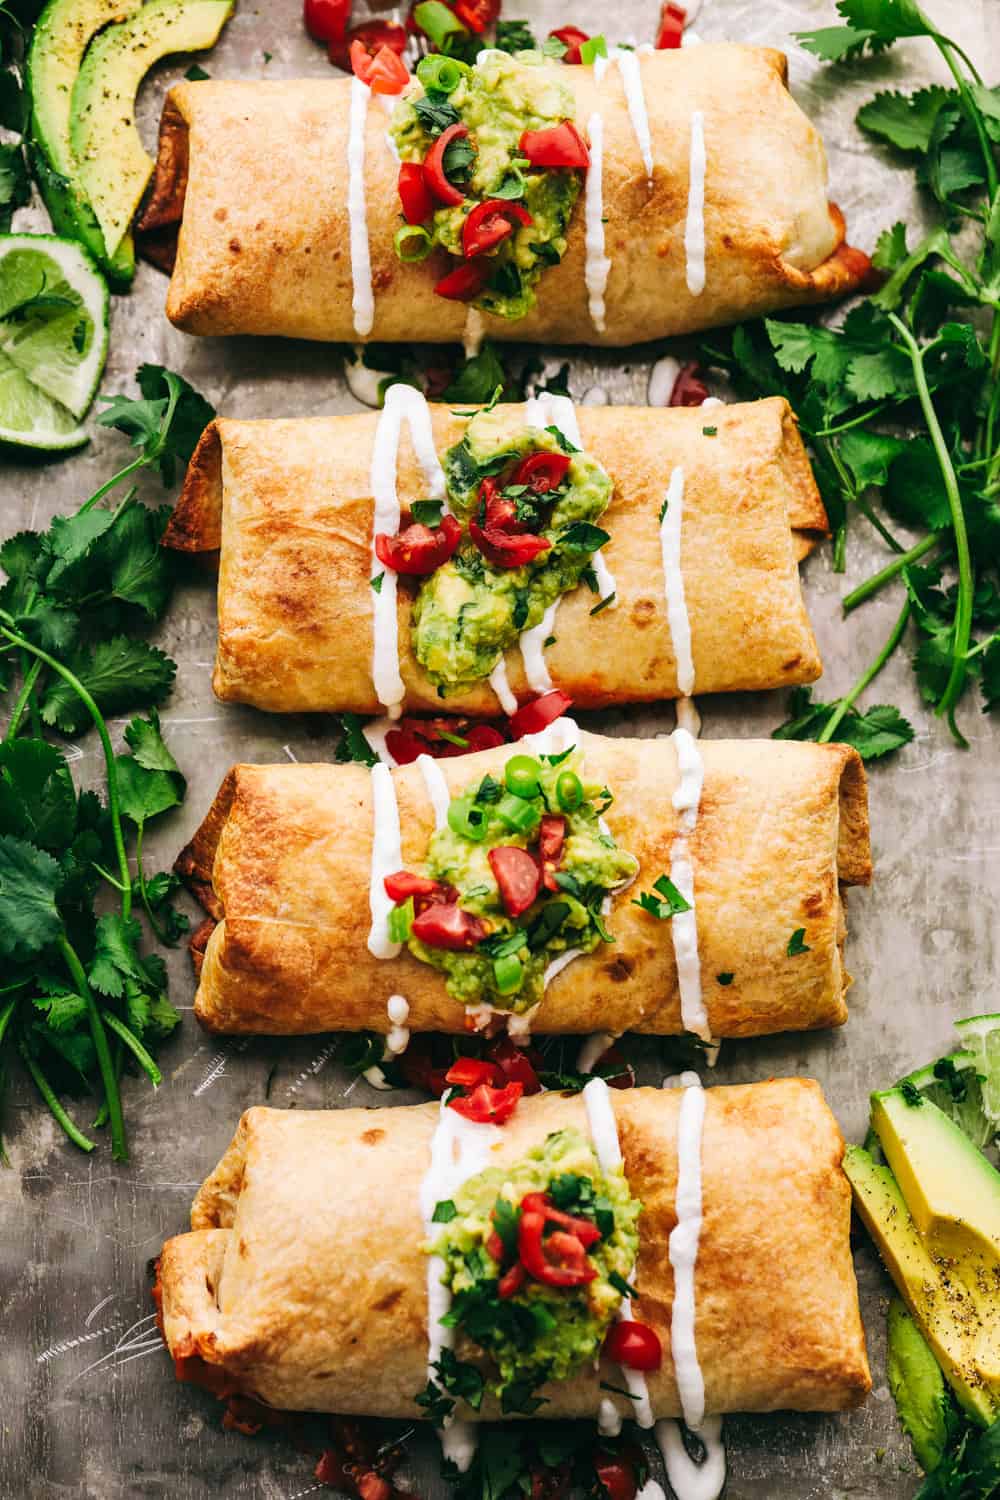 Homemade Chicken Chimichangas (Baked or Pan Fried!)